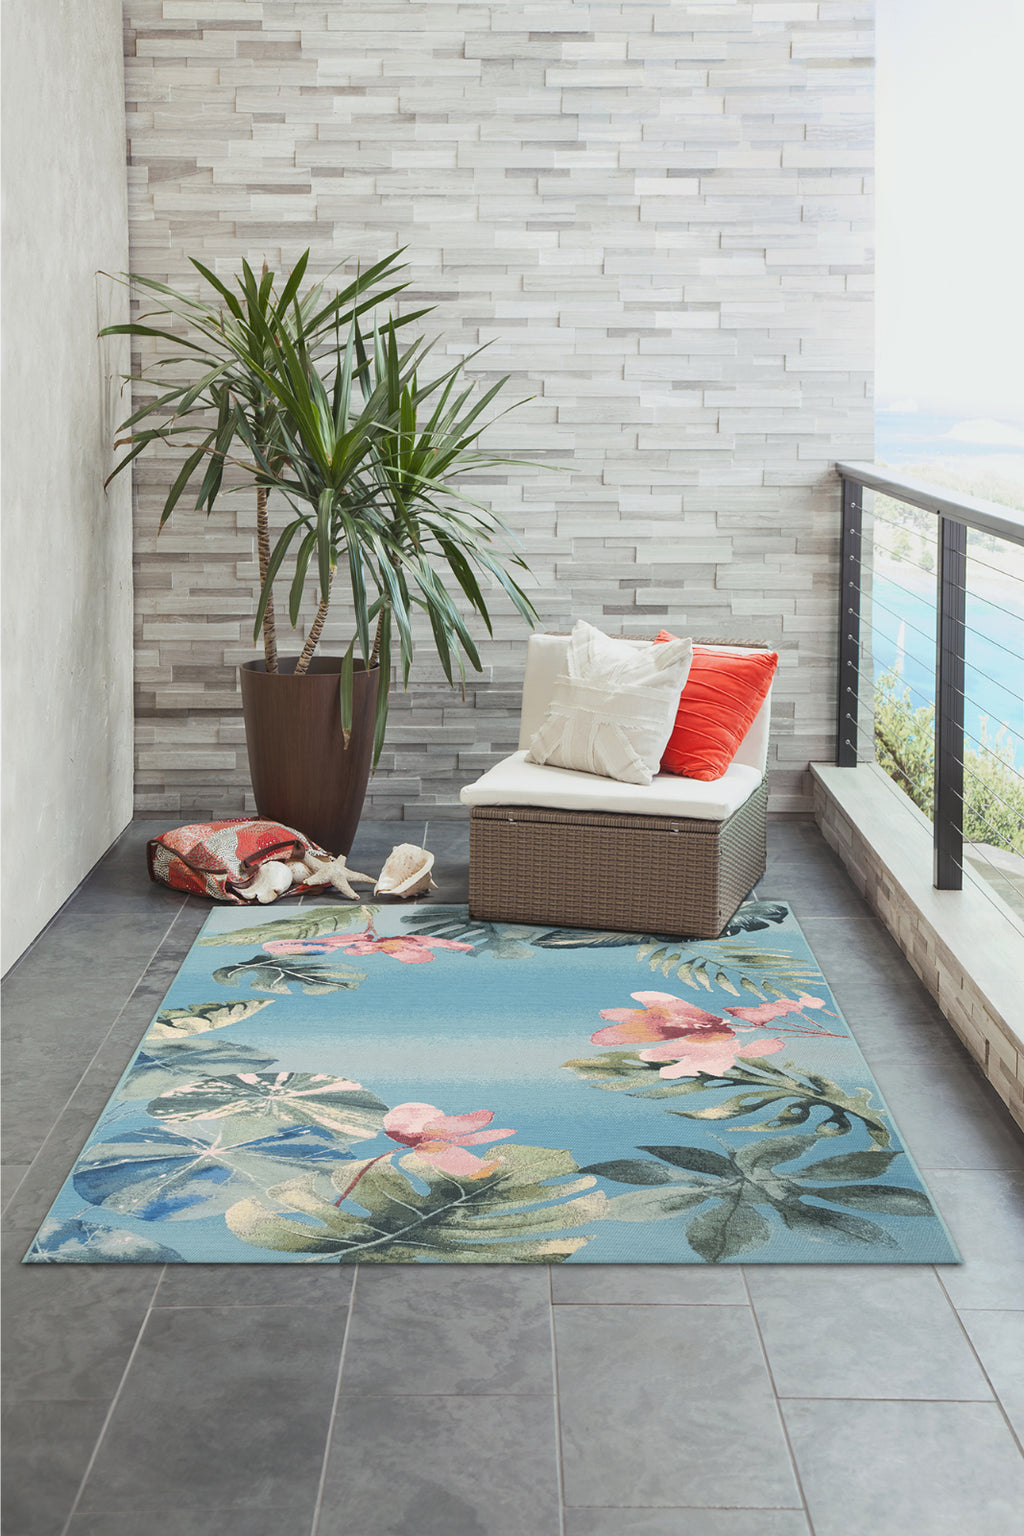 Trans Ocean Marina 8087/04 Tropical Border Blue Area Rug by Liora Manne Room Scene Image Feature